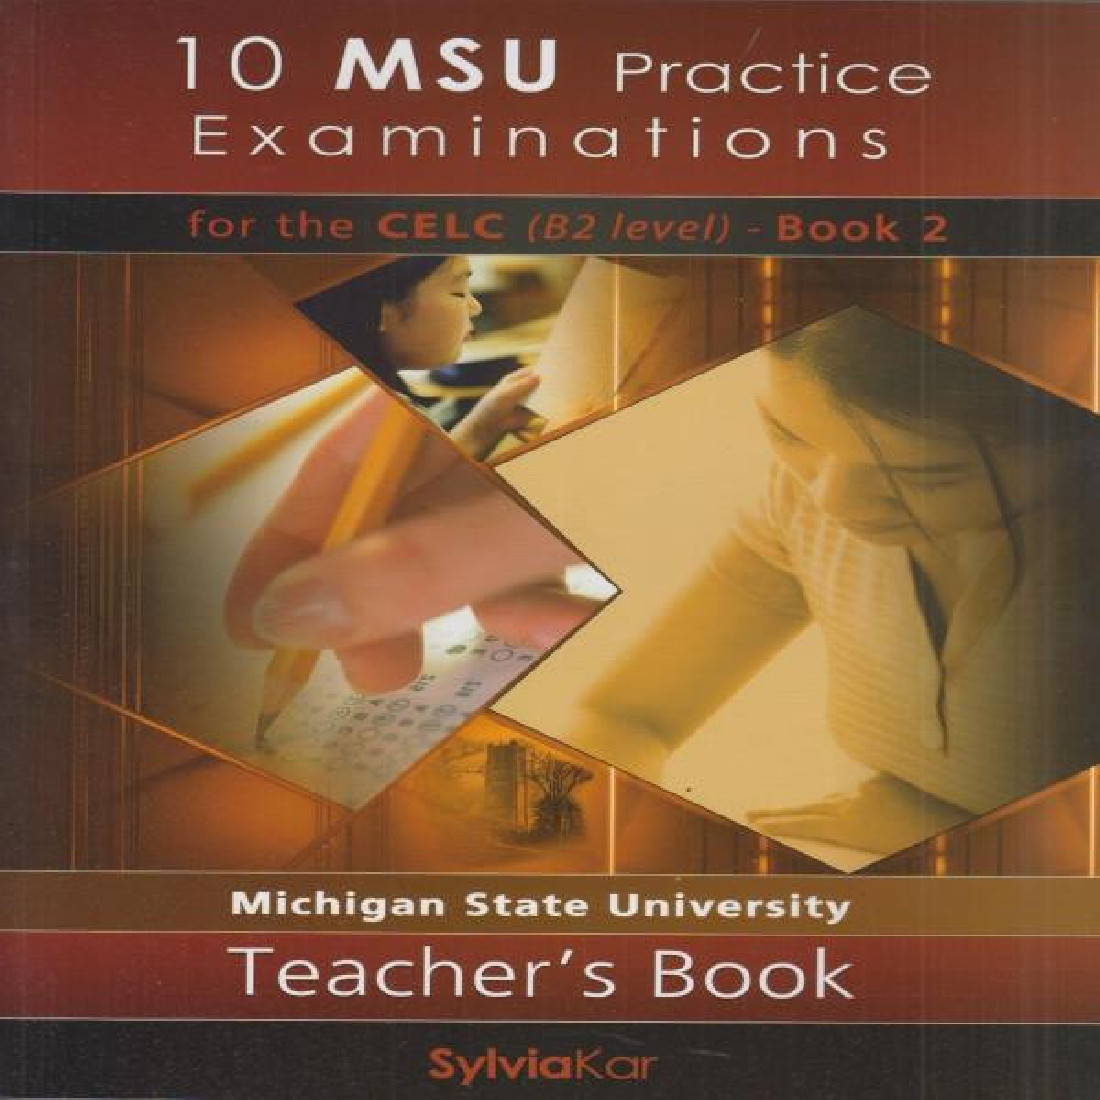 10 MSU PRACTICE EXAMINATIONS FOR THE CELC B2 BOOK 2 TEACHERS BOOK